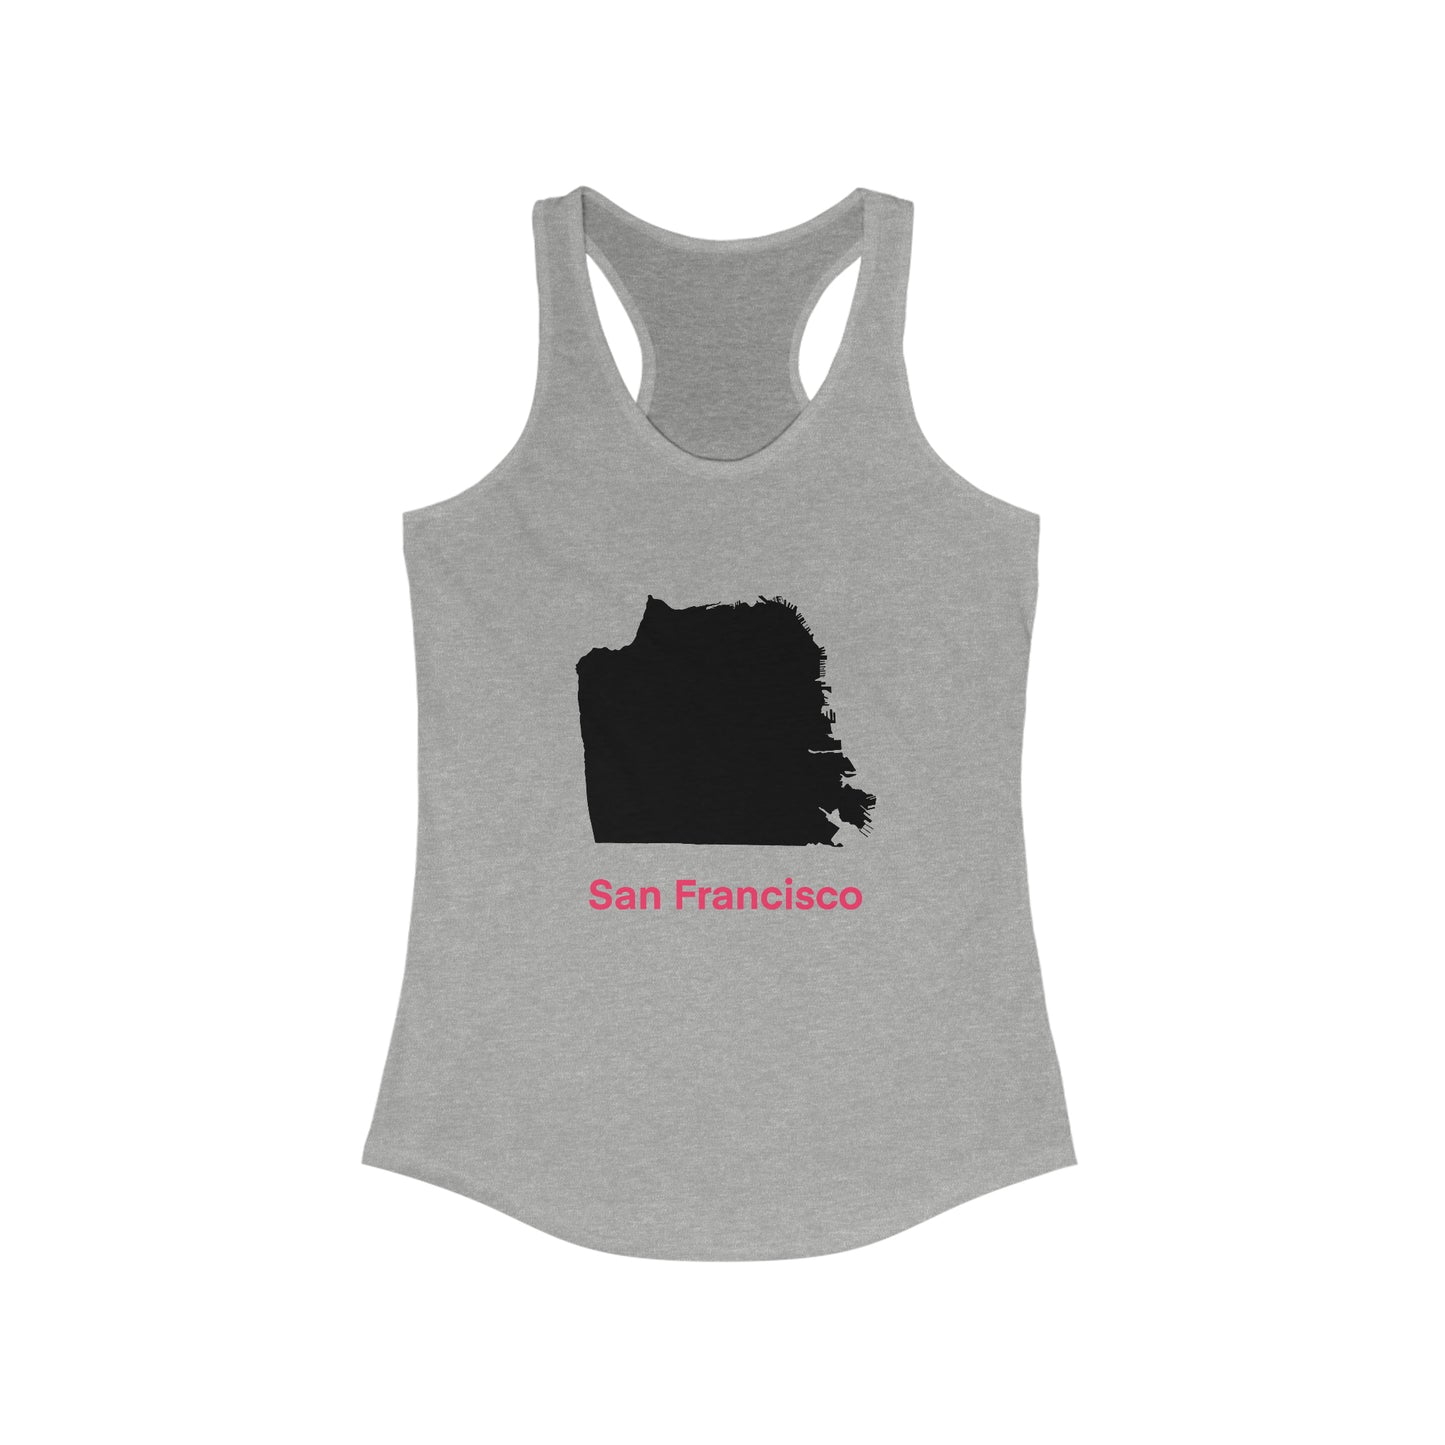 San Francisco in Black and Hot Pink Women's Ideal Racerback Tank